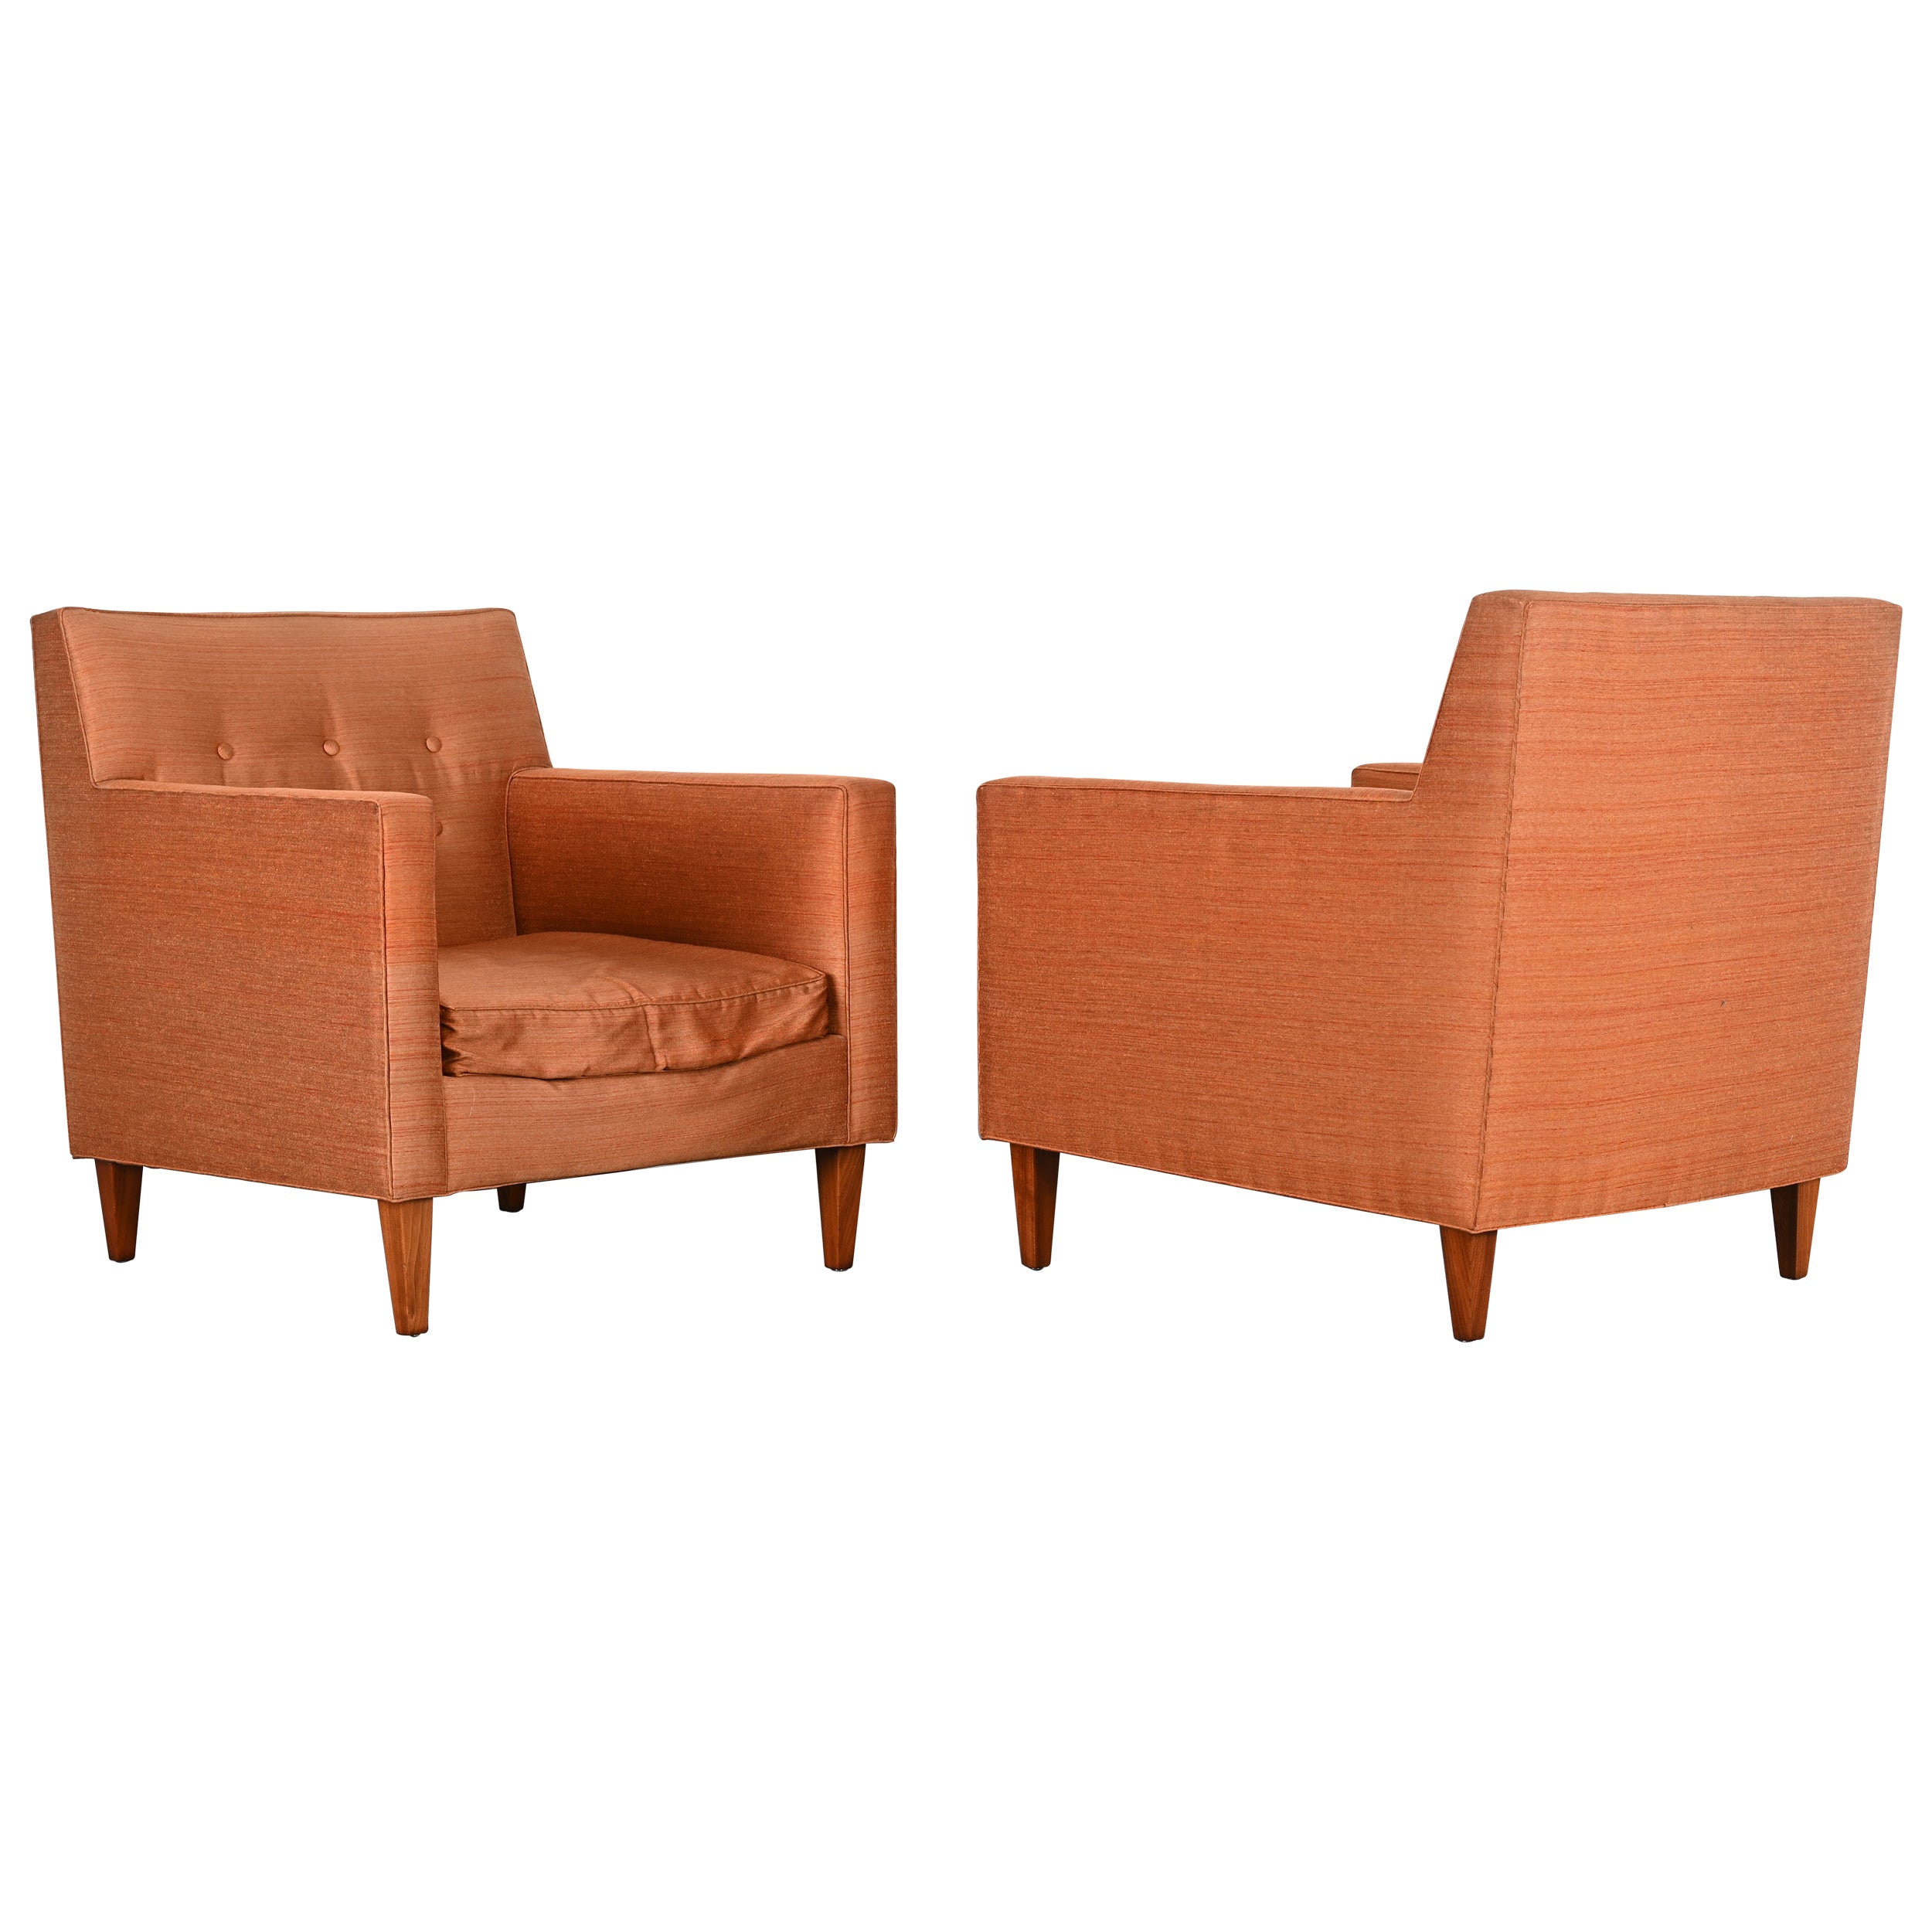 Edward Wormley for Dunbar Pair of Arm Chairs or Lounge Chairs, 1950s 